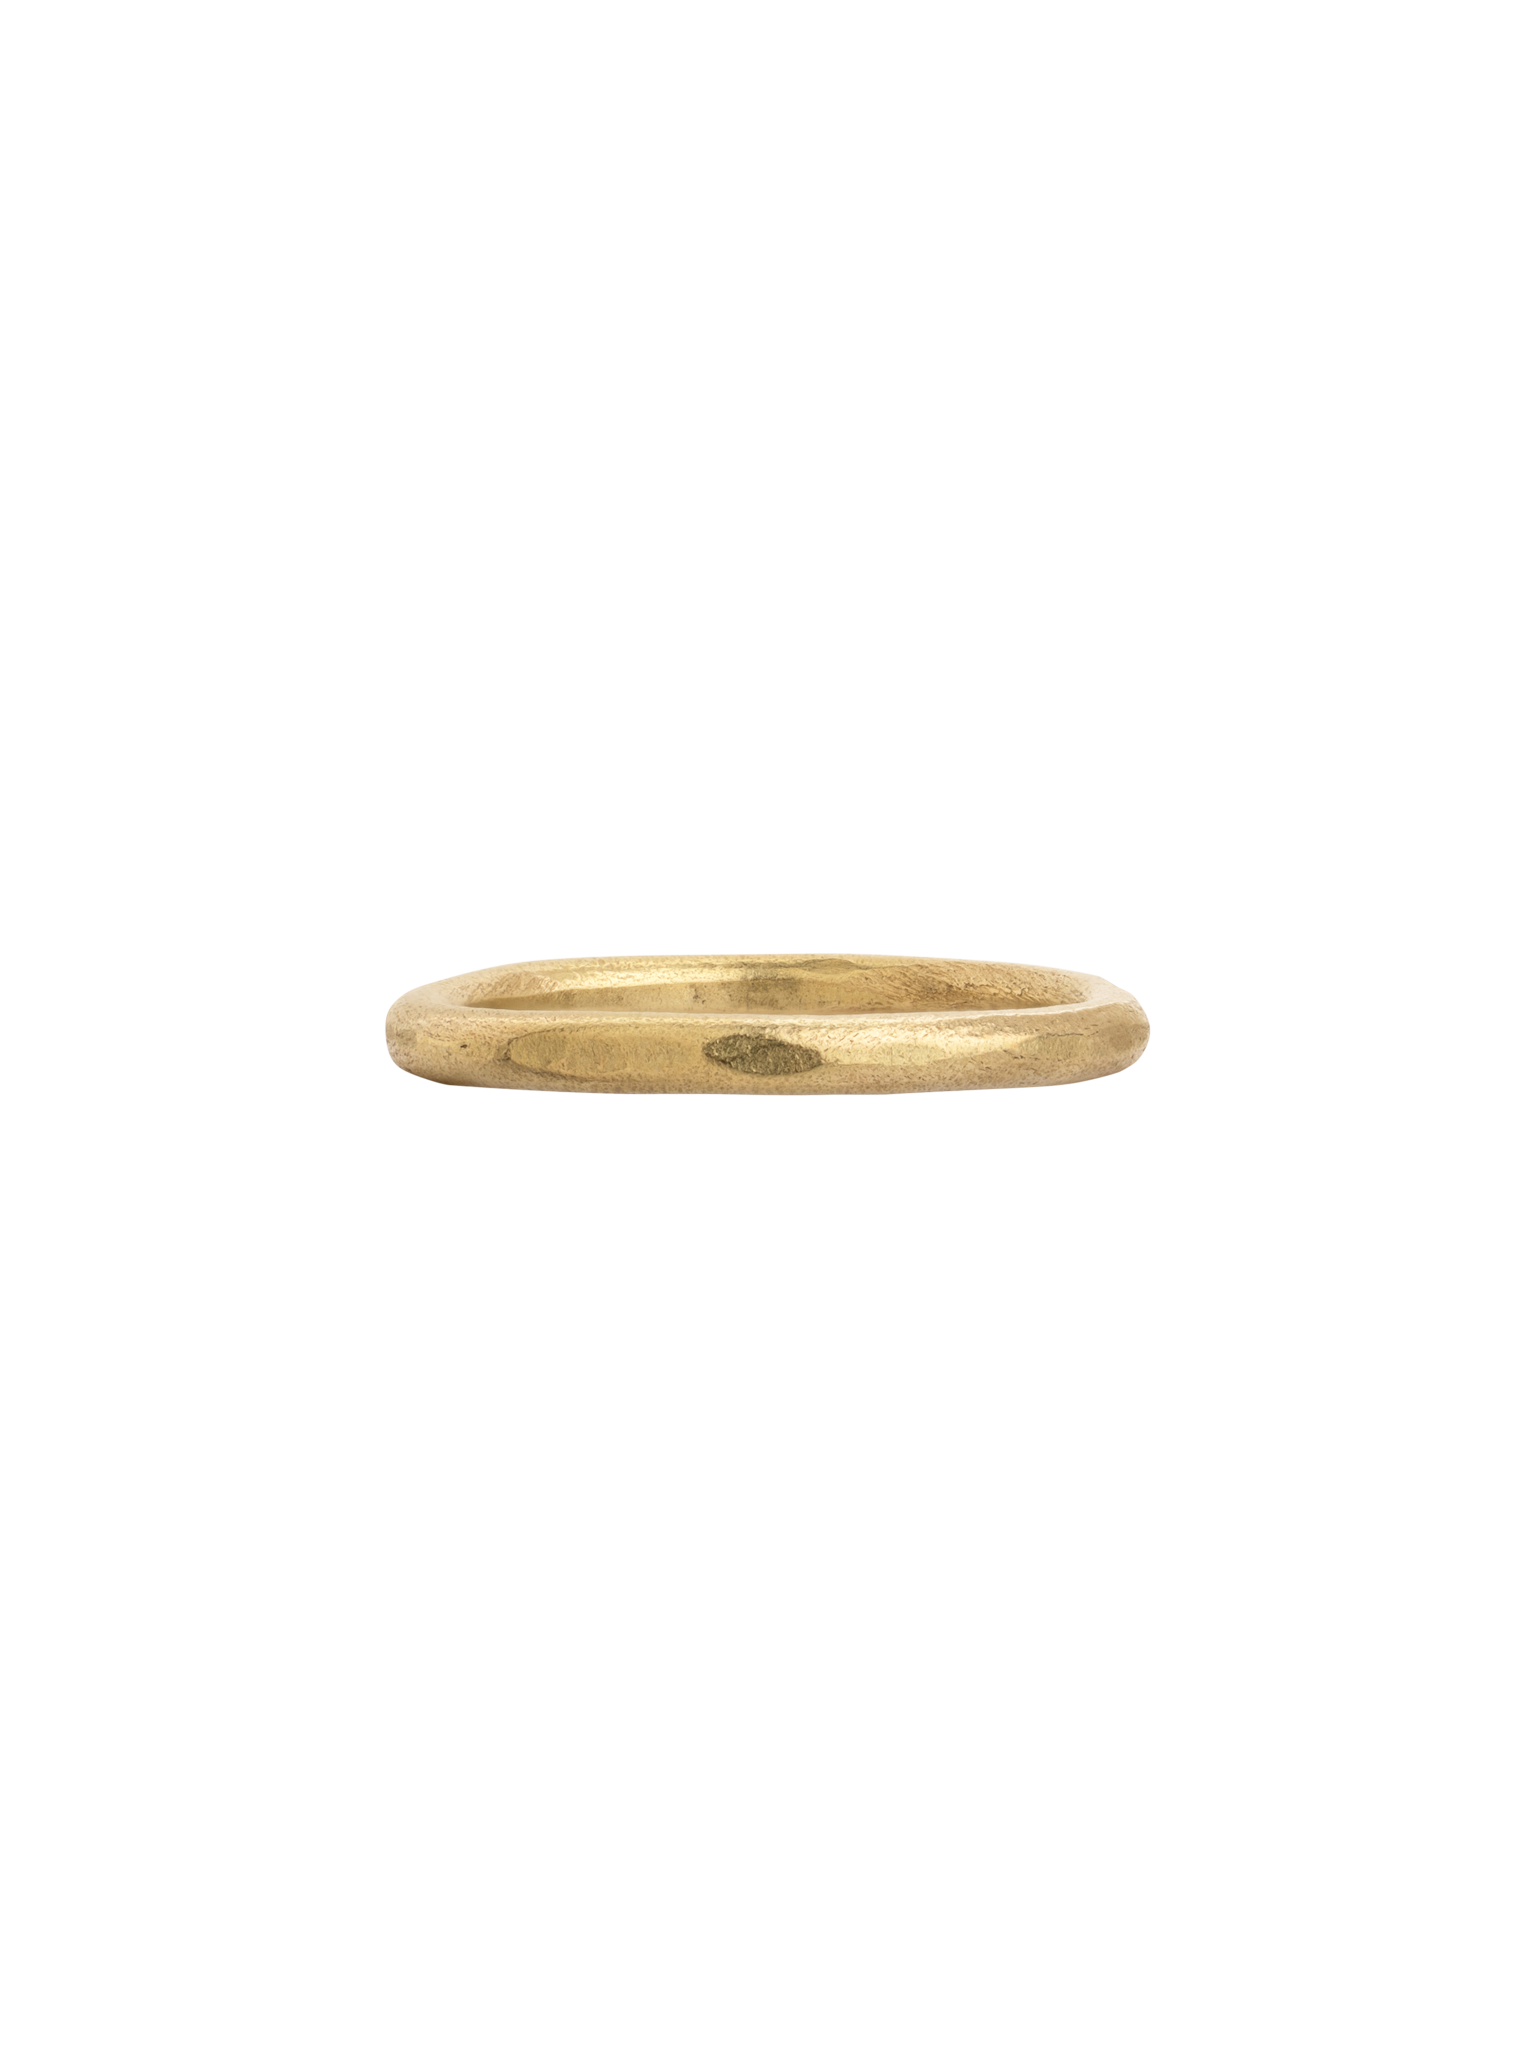 18ct yellow gold plain wedding band 2mm wide